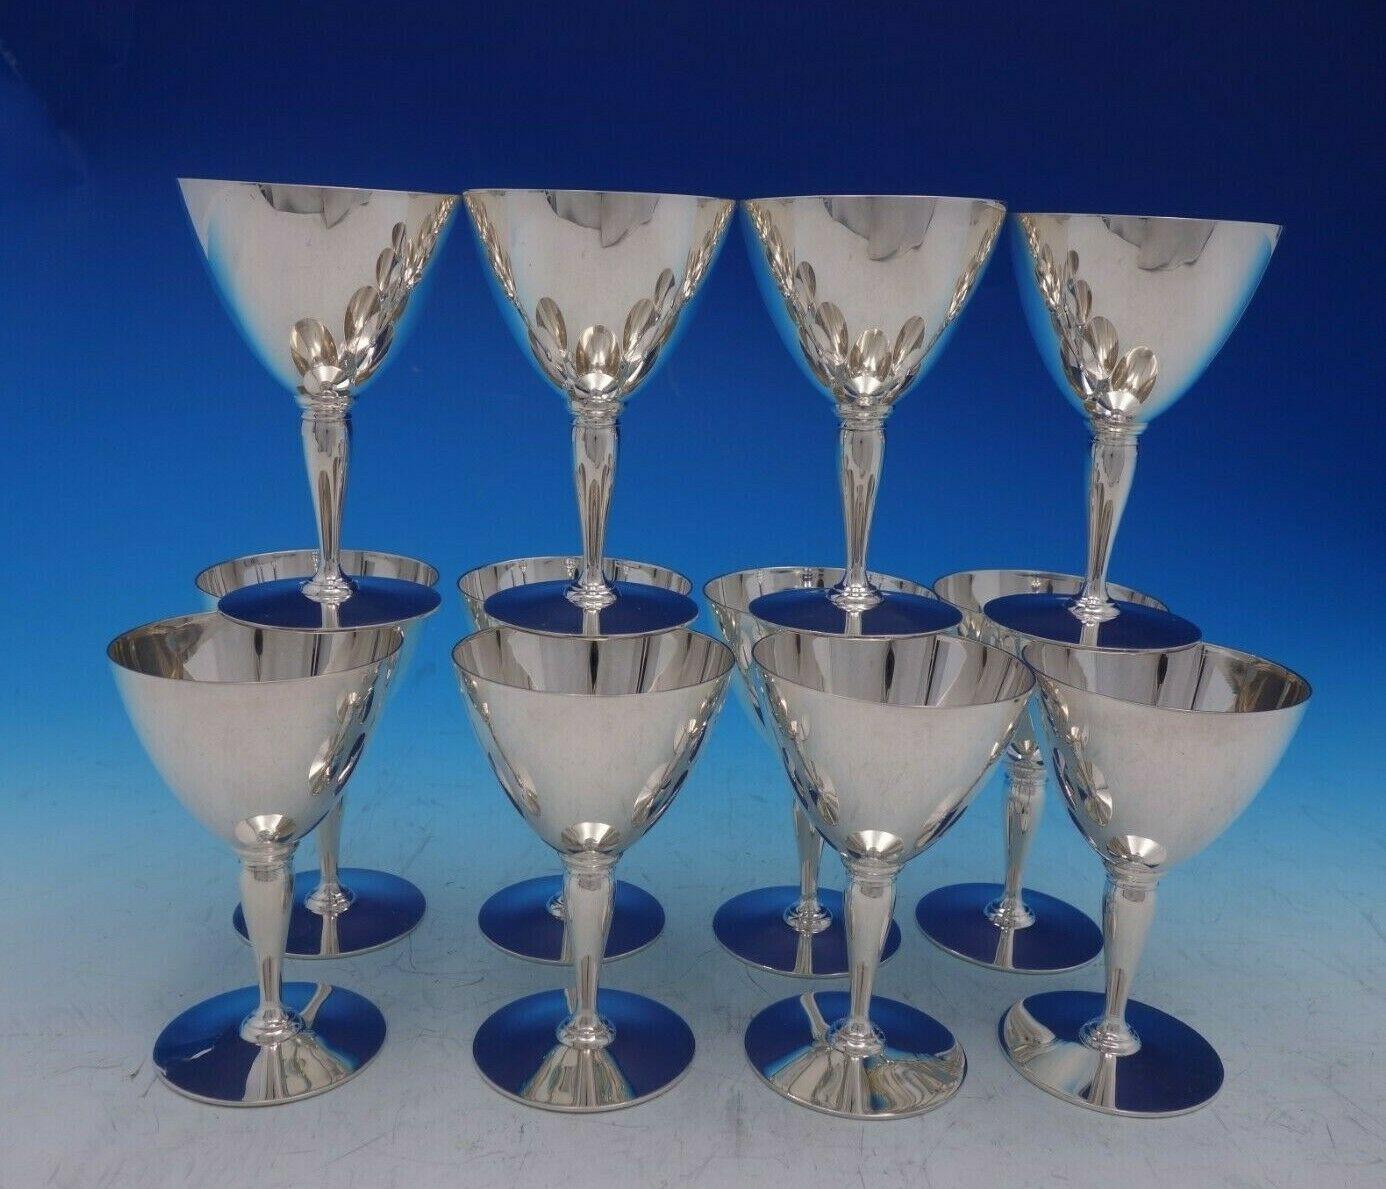 Faneuil by Tiffany and Co

Beautiful Faneuil by Tiffany and Co. sterling silver 12-piece after-dinner wine glass set marked #18885-7895. The pieces each measure 4